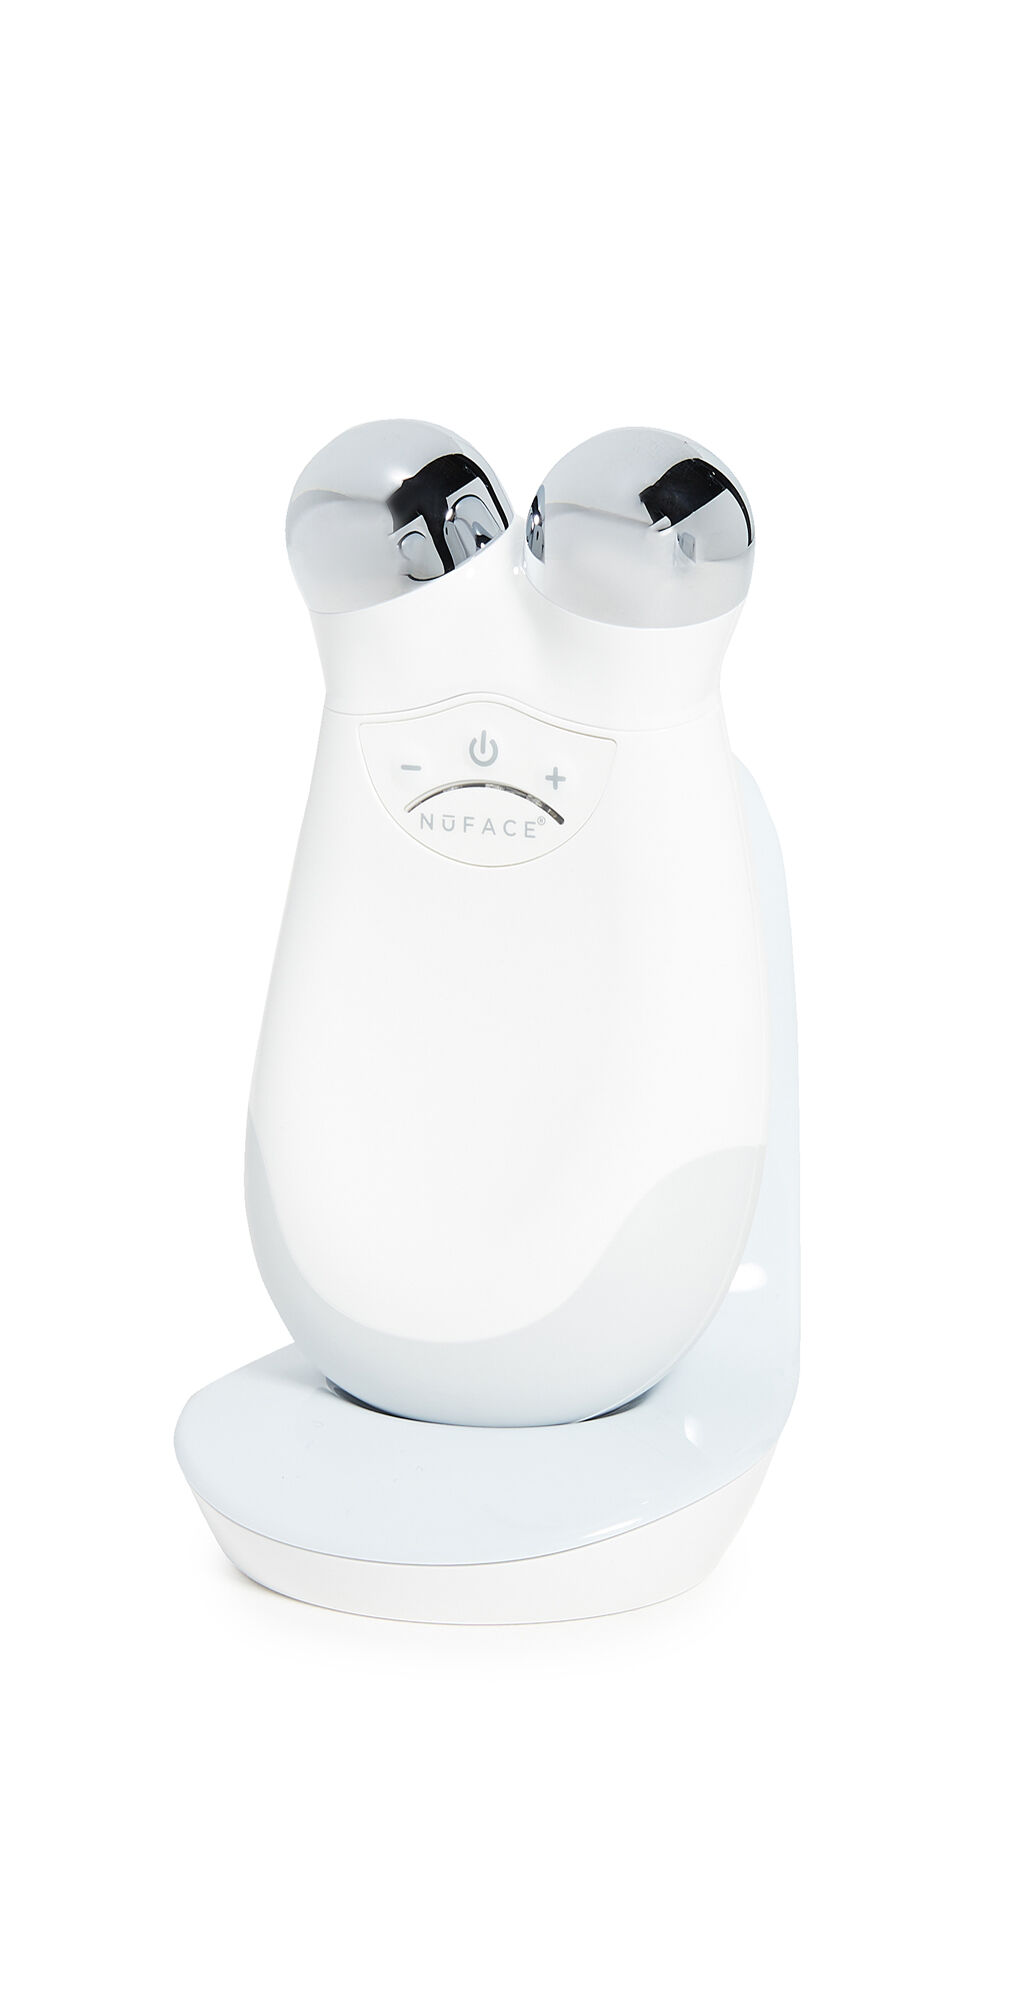 Shopbop Home Shopbop @Home NuFACE Trinity Facial Toning Device White One Size    size: